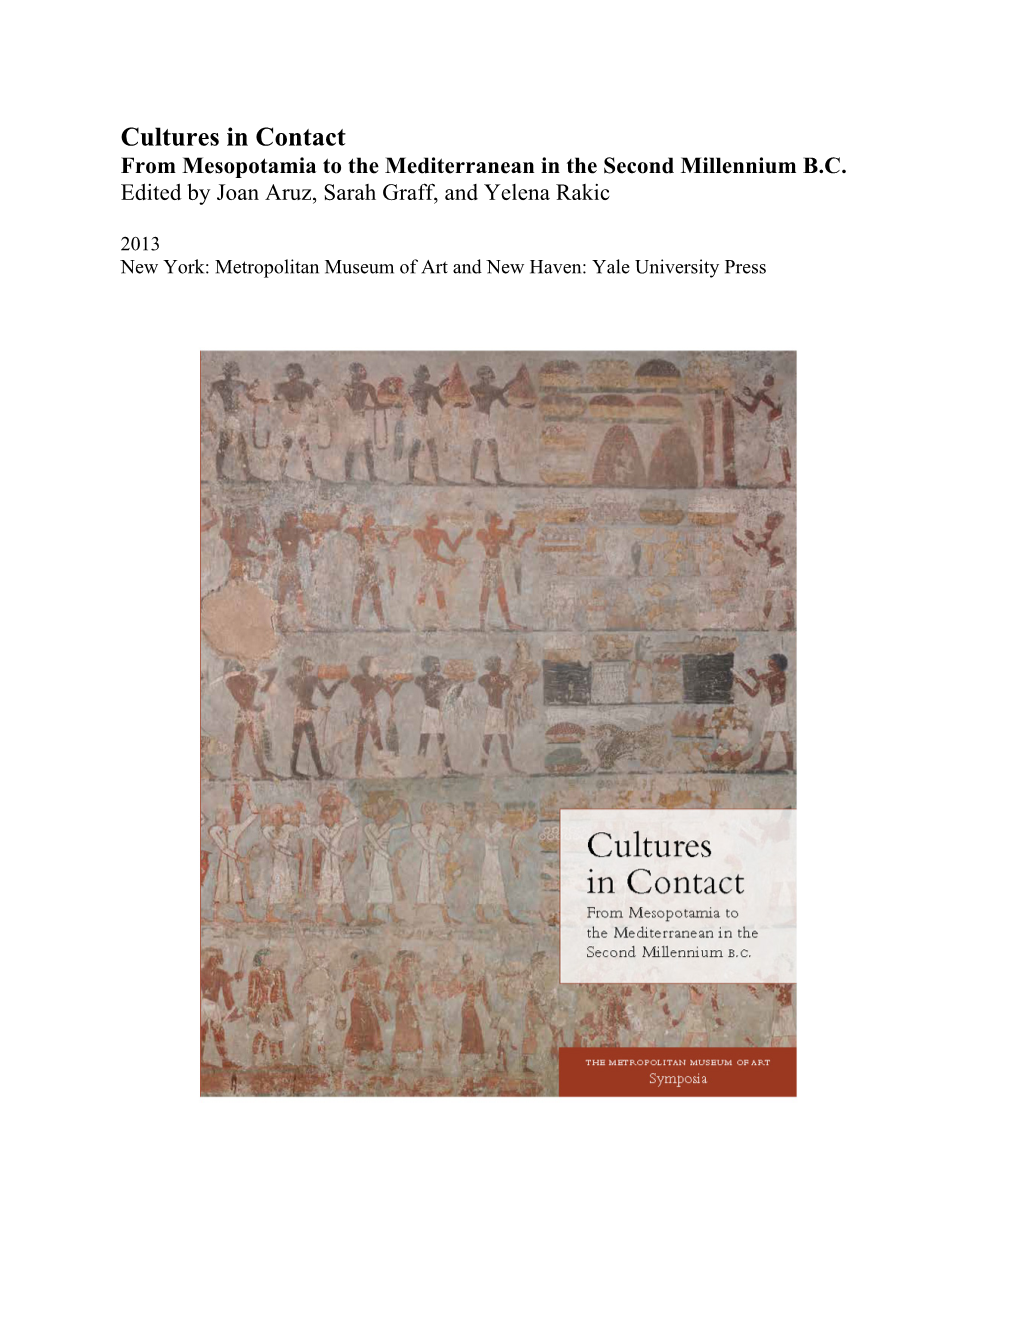 Cultures in Contact from Mesopotamia to the Mediterranean in the Second Millennium B.C